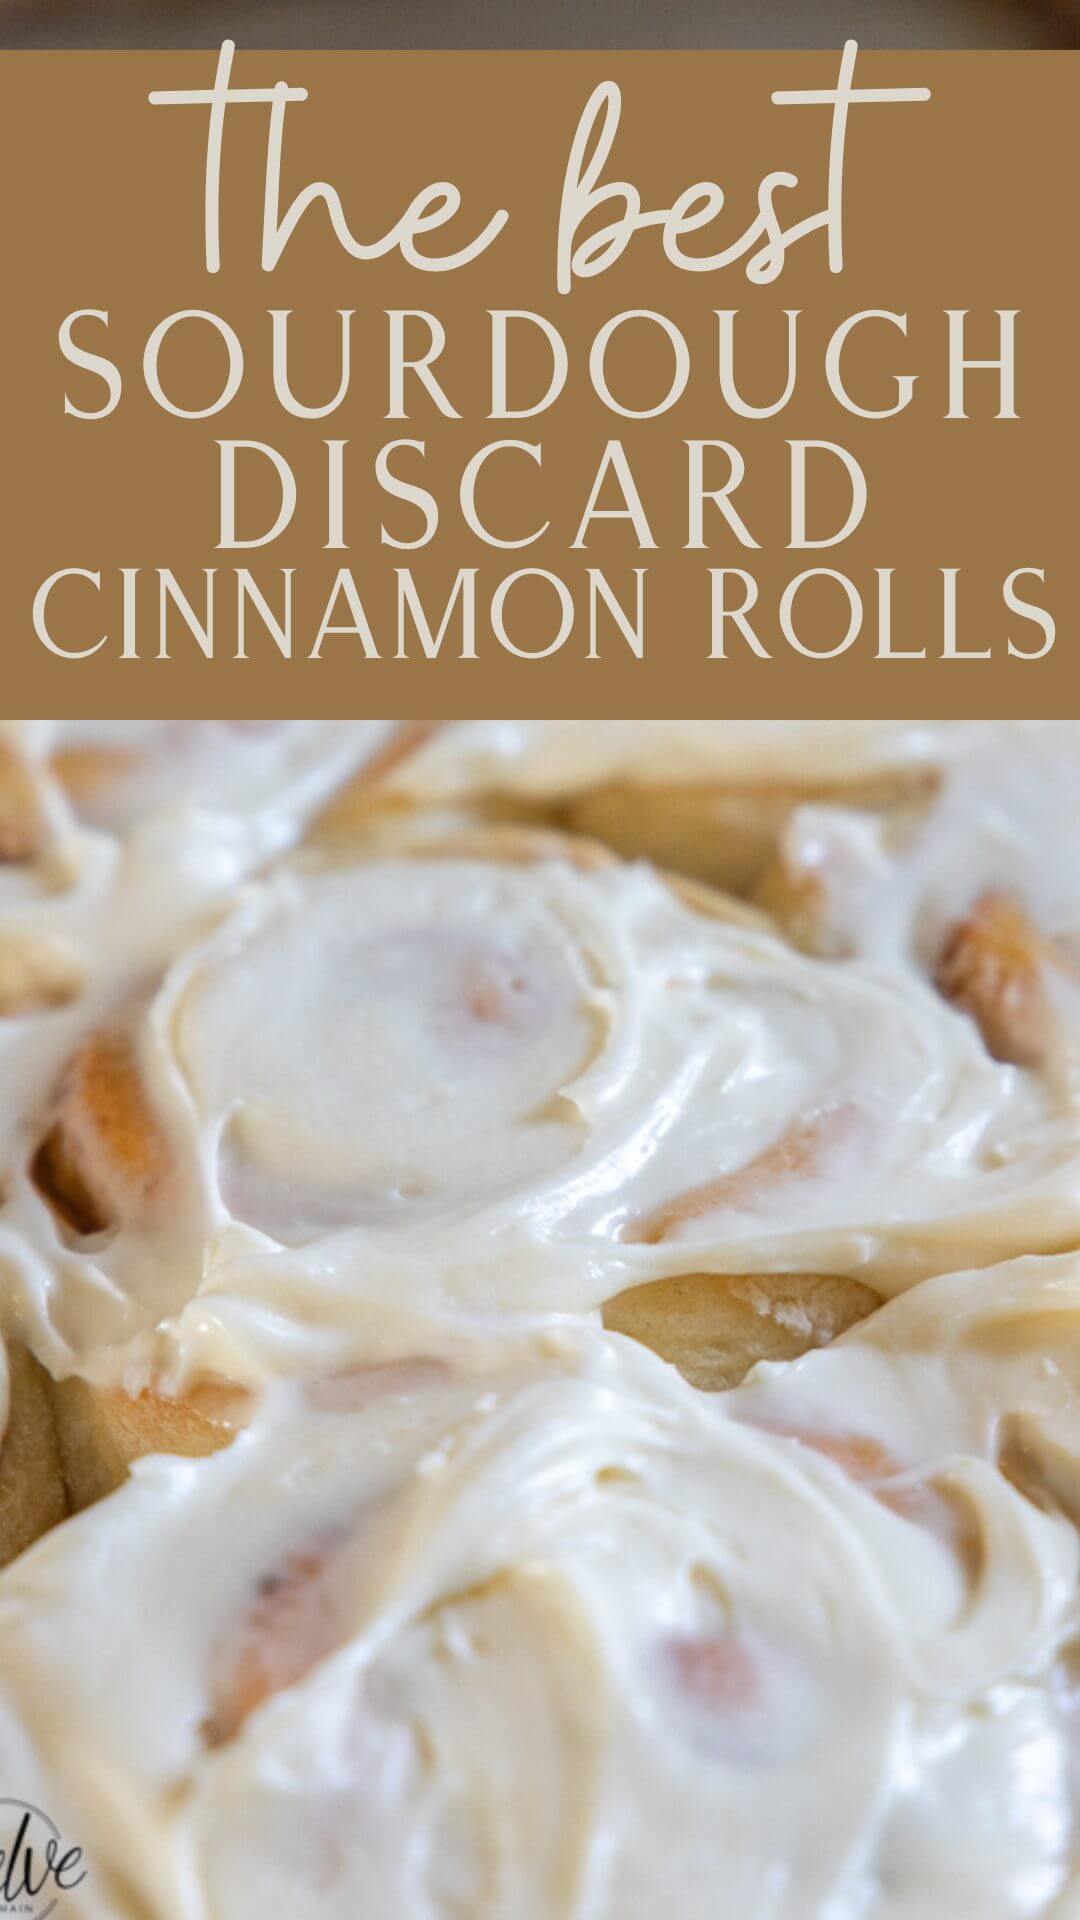 Oh my gosh these sourdough discard cinnamon rolls are amazing! They are light and fluffy. The flavors are amazing and it uses up discard!